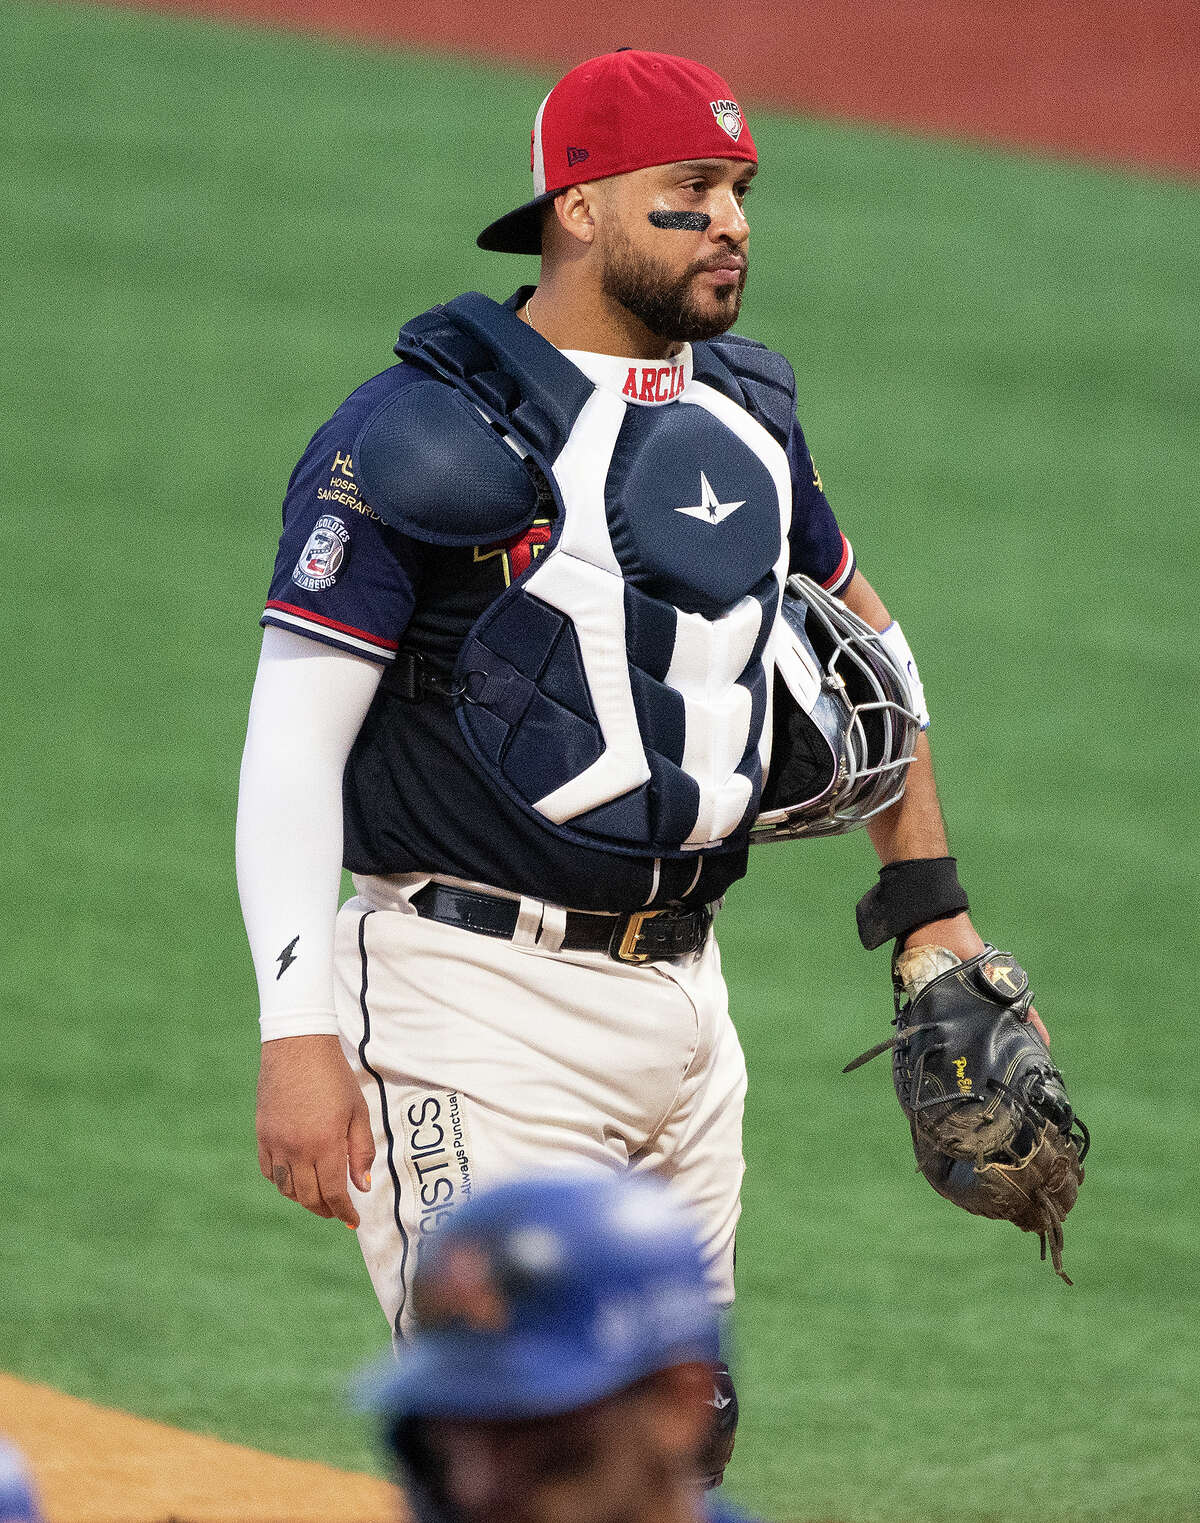 Former Tecolotes Dos Laredos catcher Francisco Arcia signed a minor league deal with the Washington Nationals on Monday.